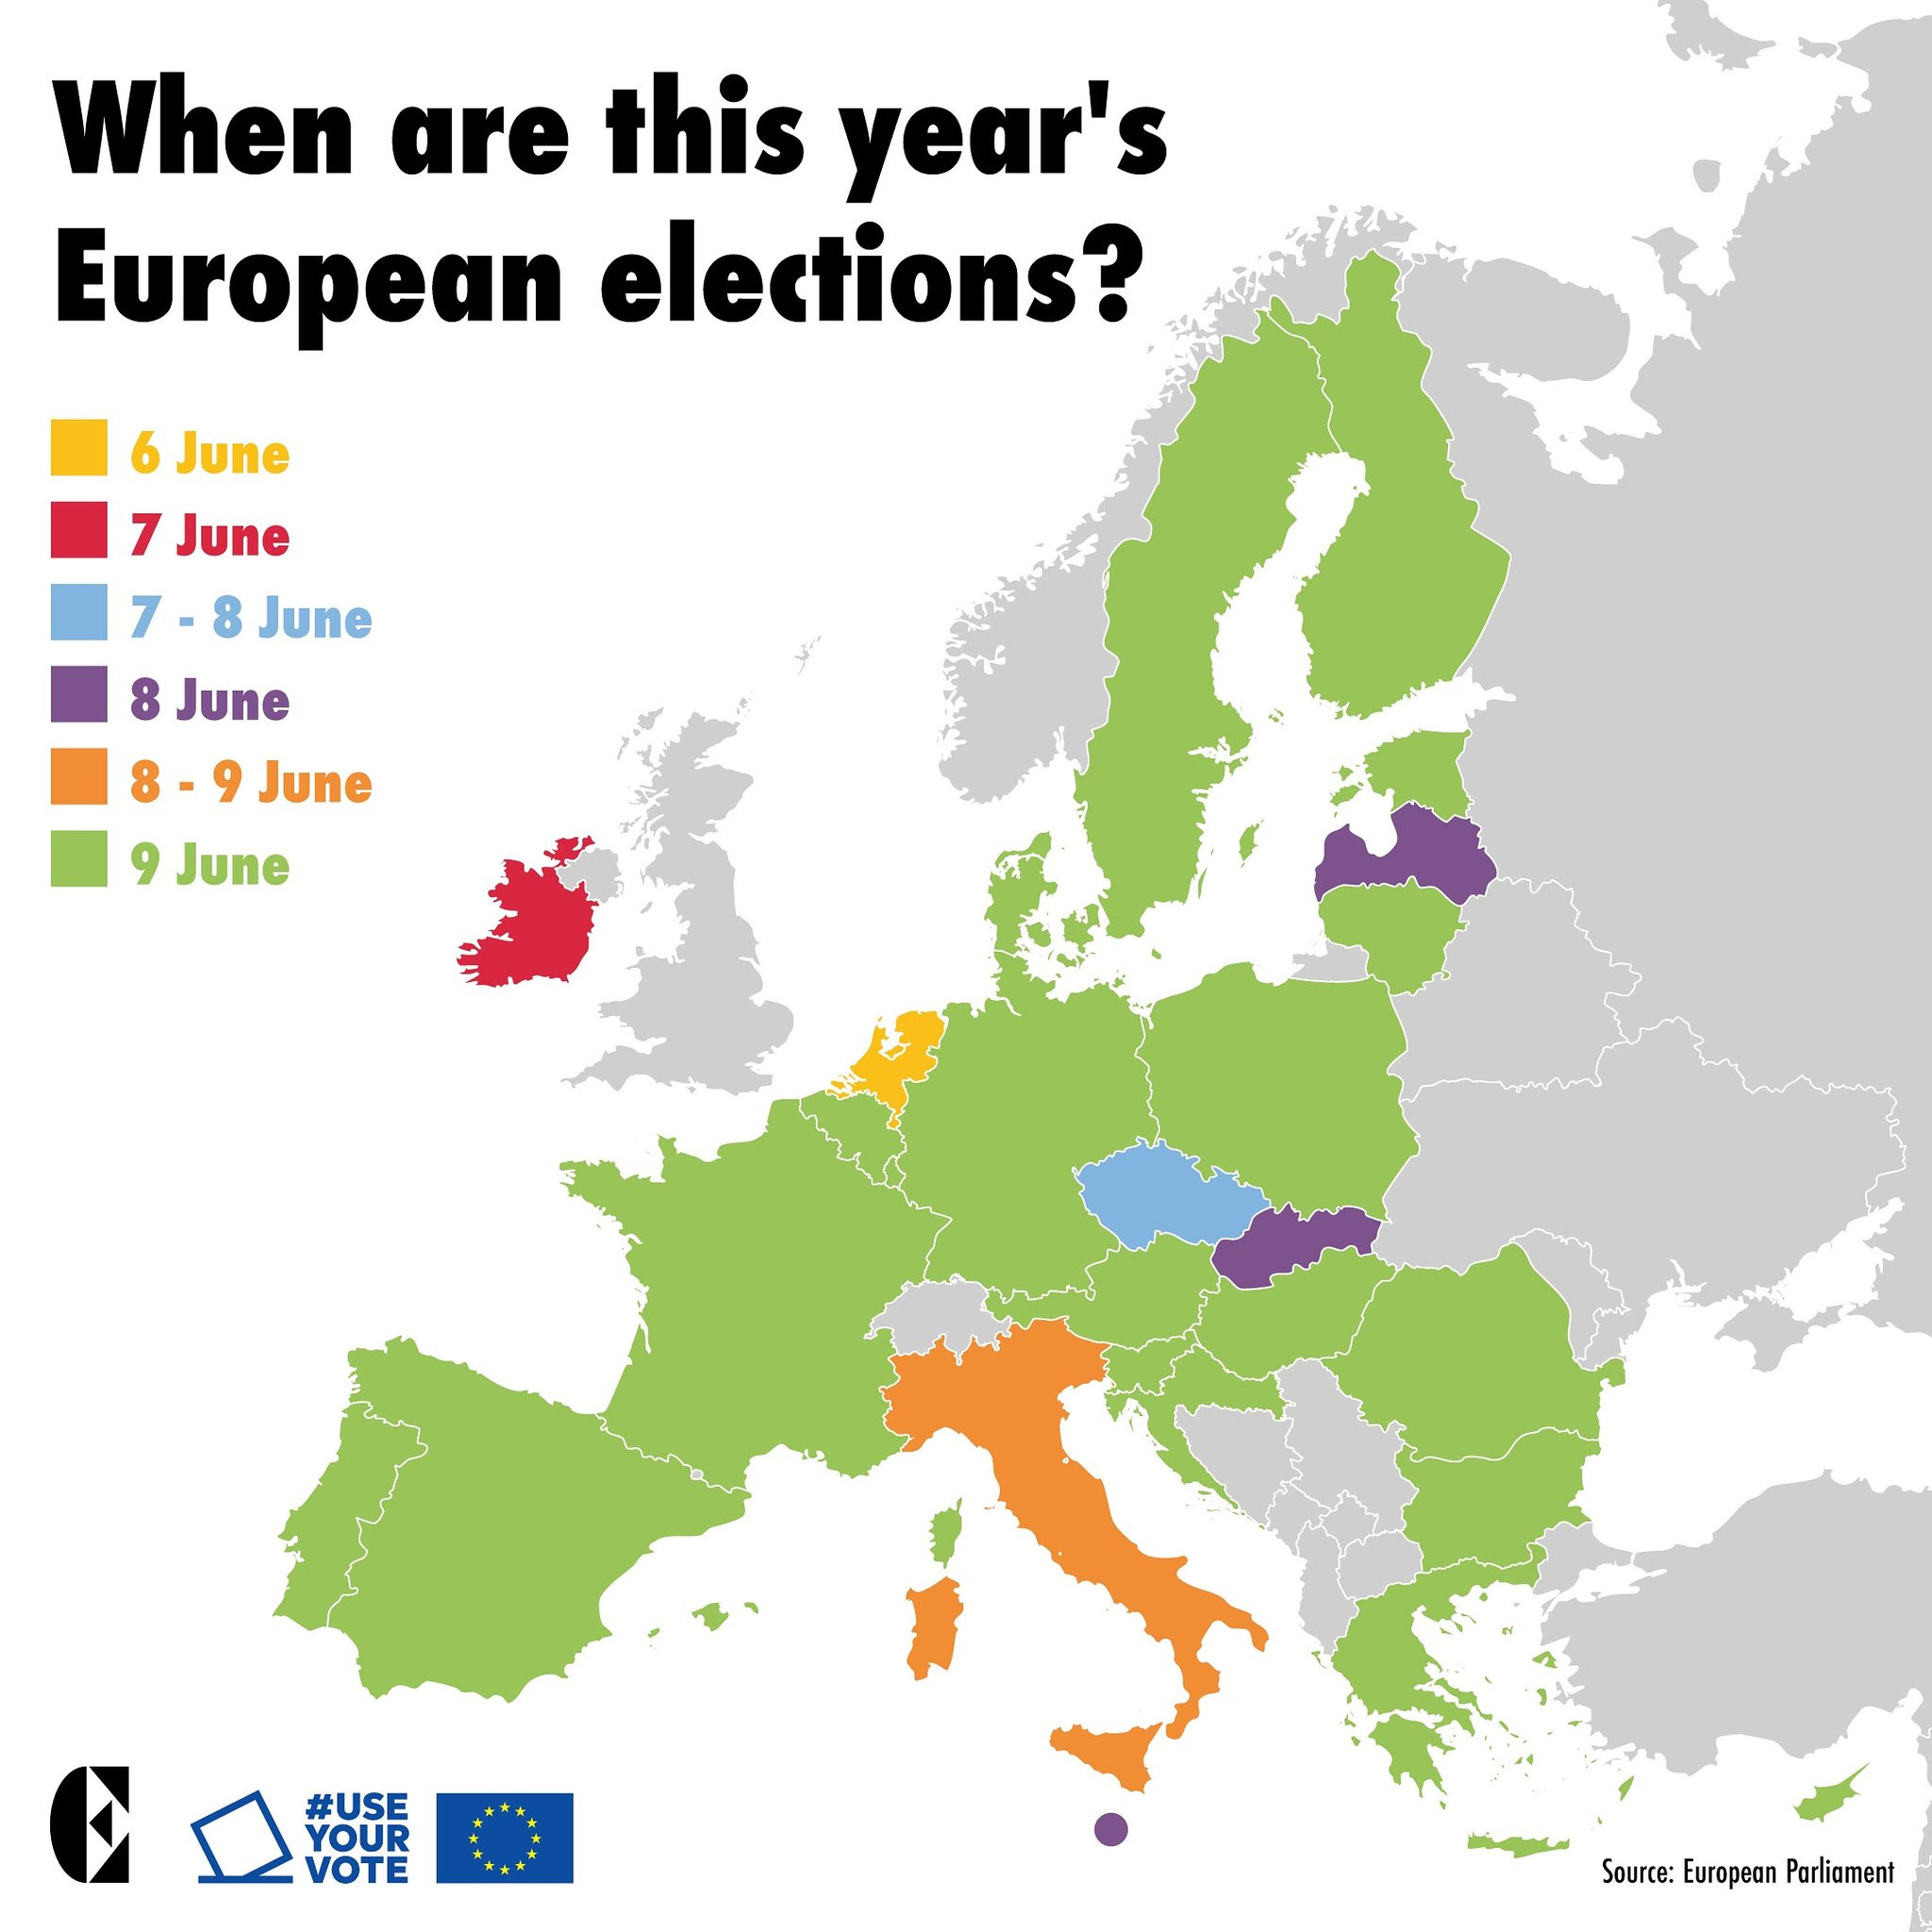 When are this year's European elections?